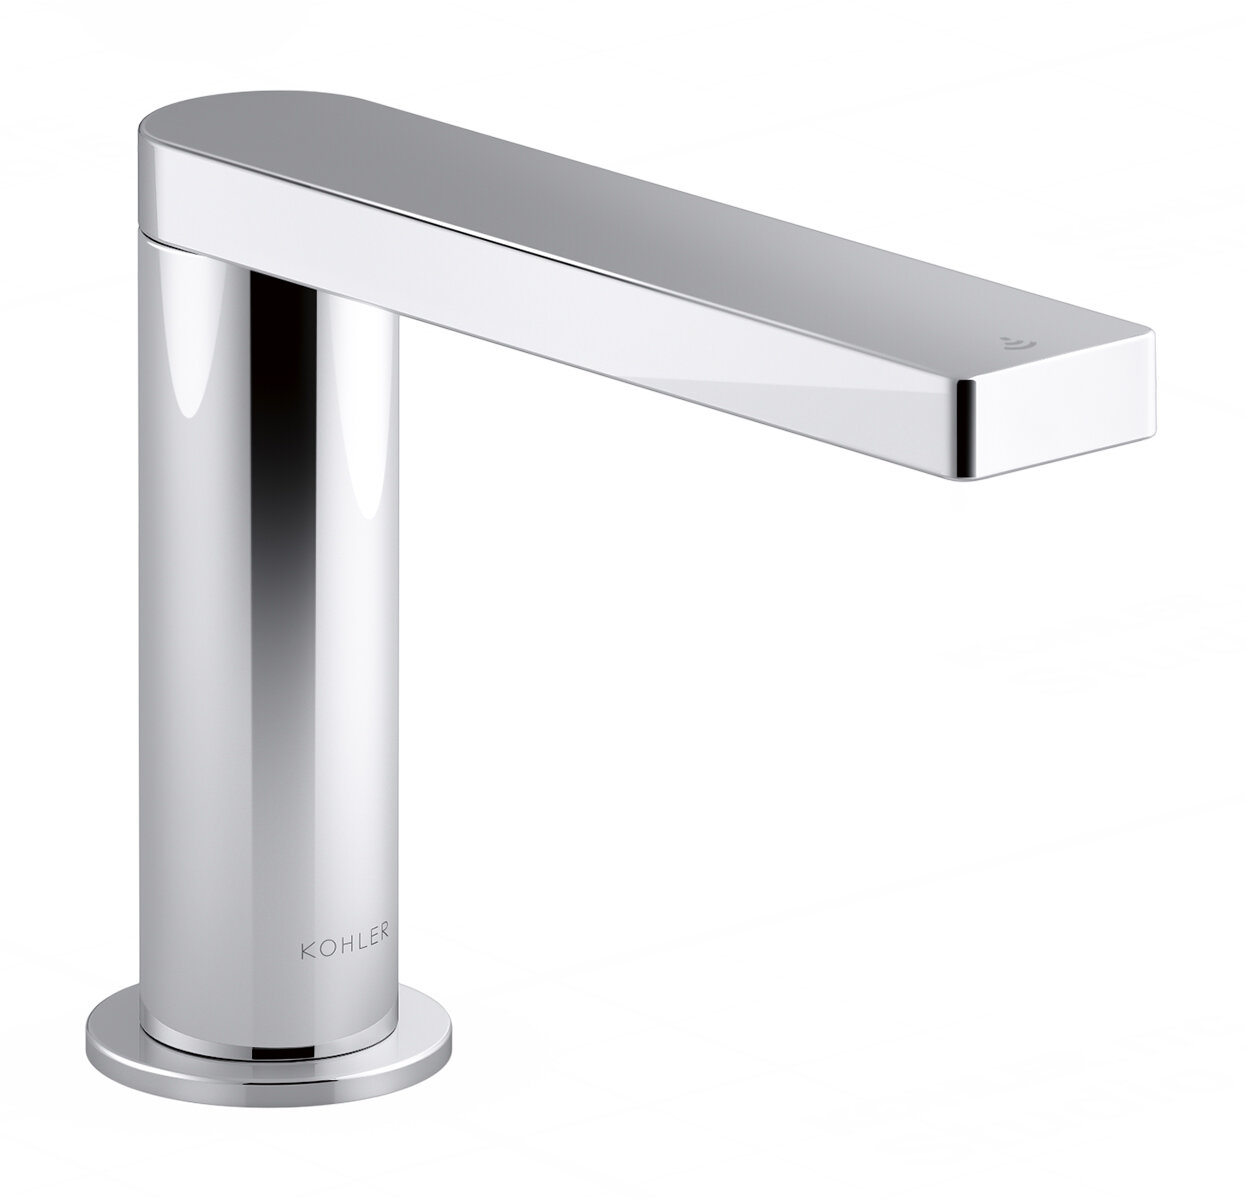 Kohler Composed Touchless Bathroom Sink Faucet With Kinesis Sensor